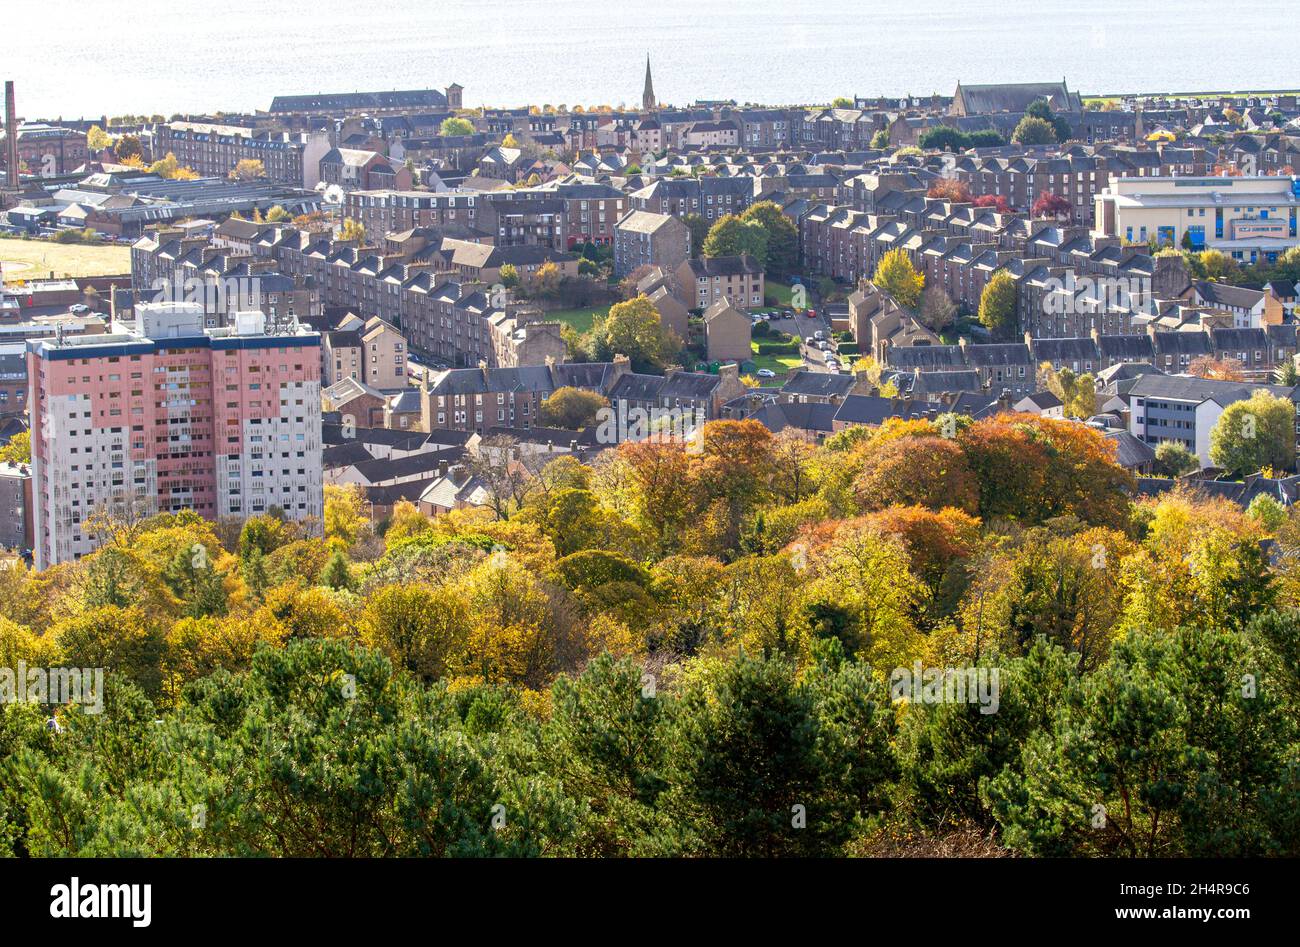 Dundee, Tayside, Scotland, UK. 4th November. UK Weather: A bright and sunny November morning across North East Scotland with temperatures reaching 10°C. A colourful Autumnal landscape view of Dundee city observed from the “Law” the remains of a volcanic sill and is the highest view point in the city. Credit: Dundee Photographics/Alamy Live News Stock Photo